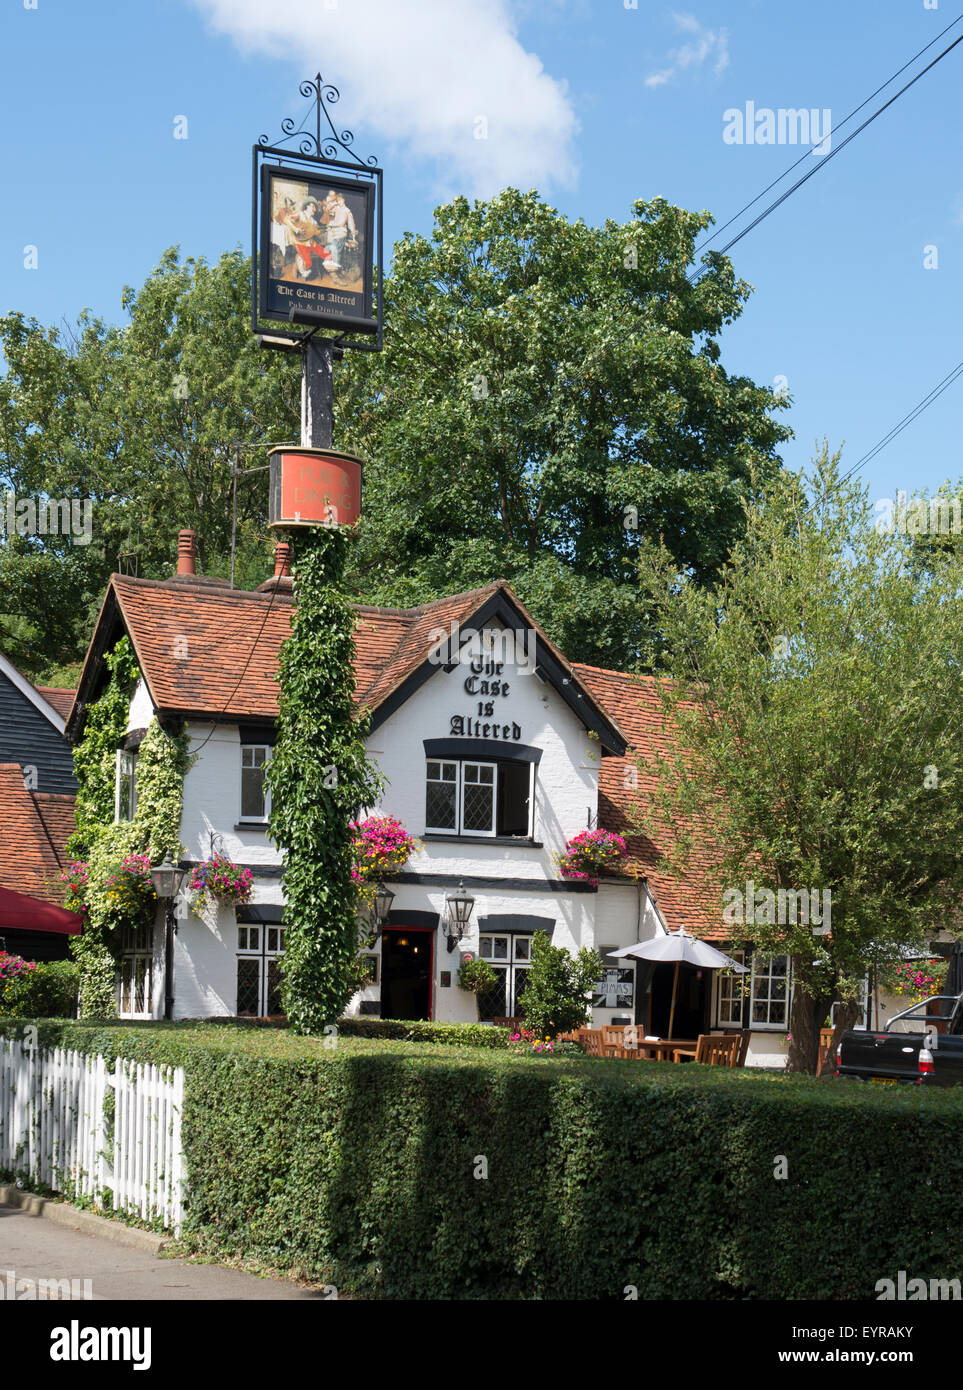 The Case is Altered Pub, Eastcote, Middlesex Stock Photo